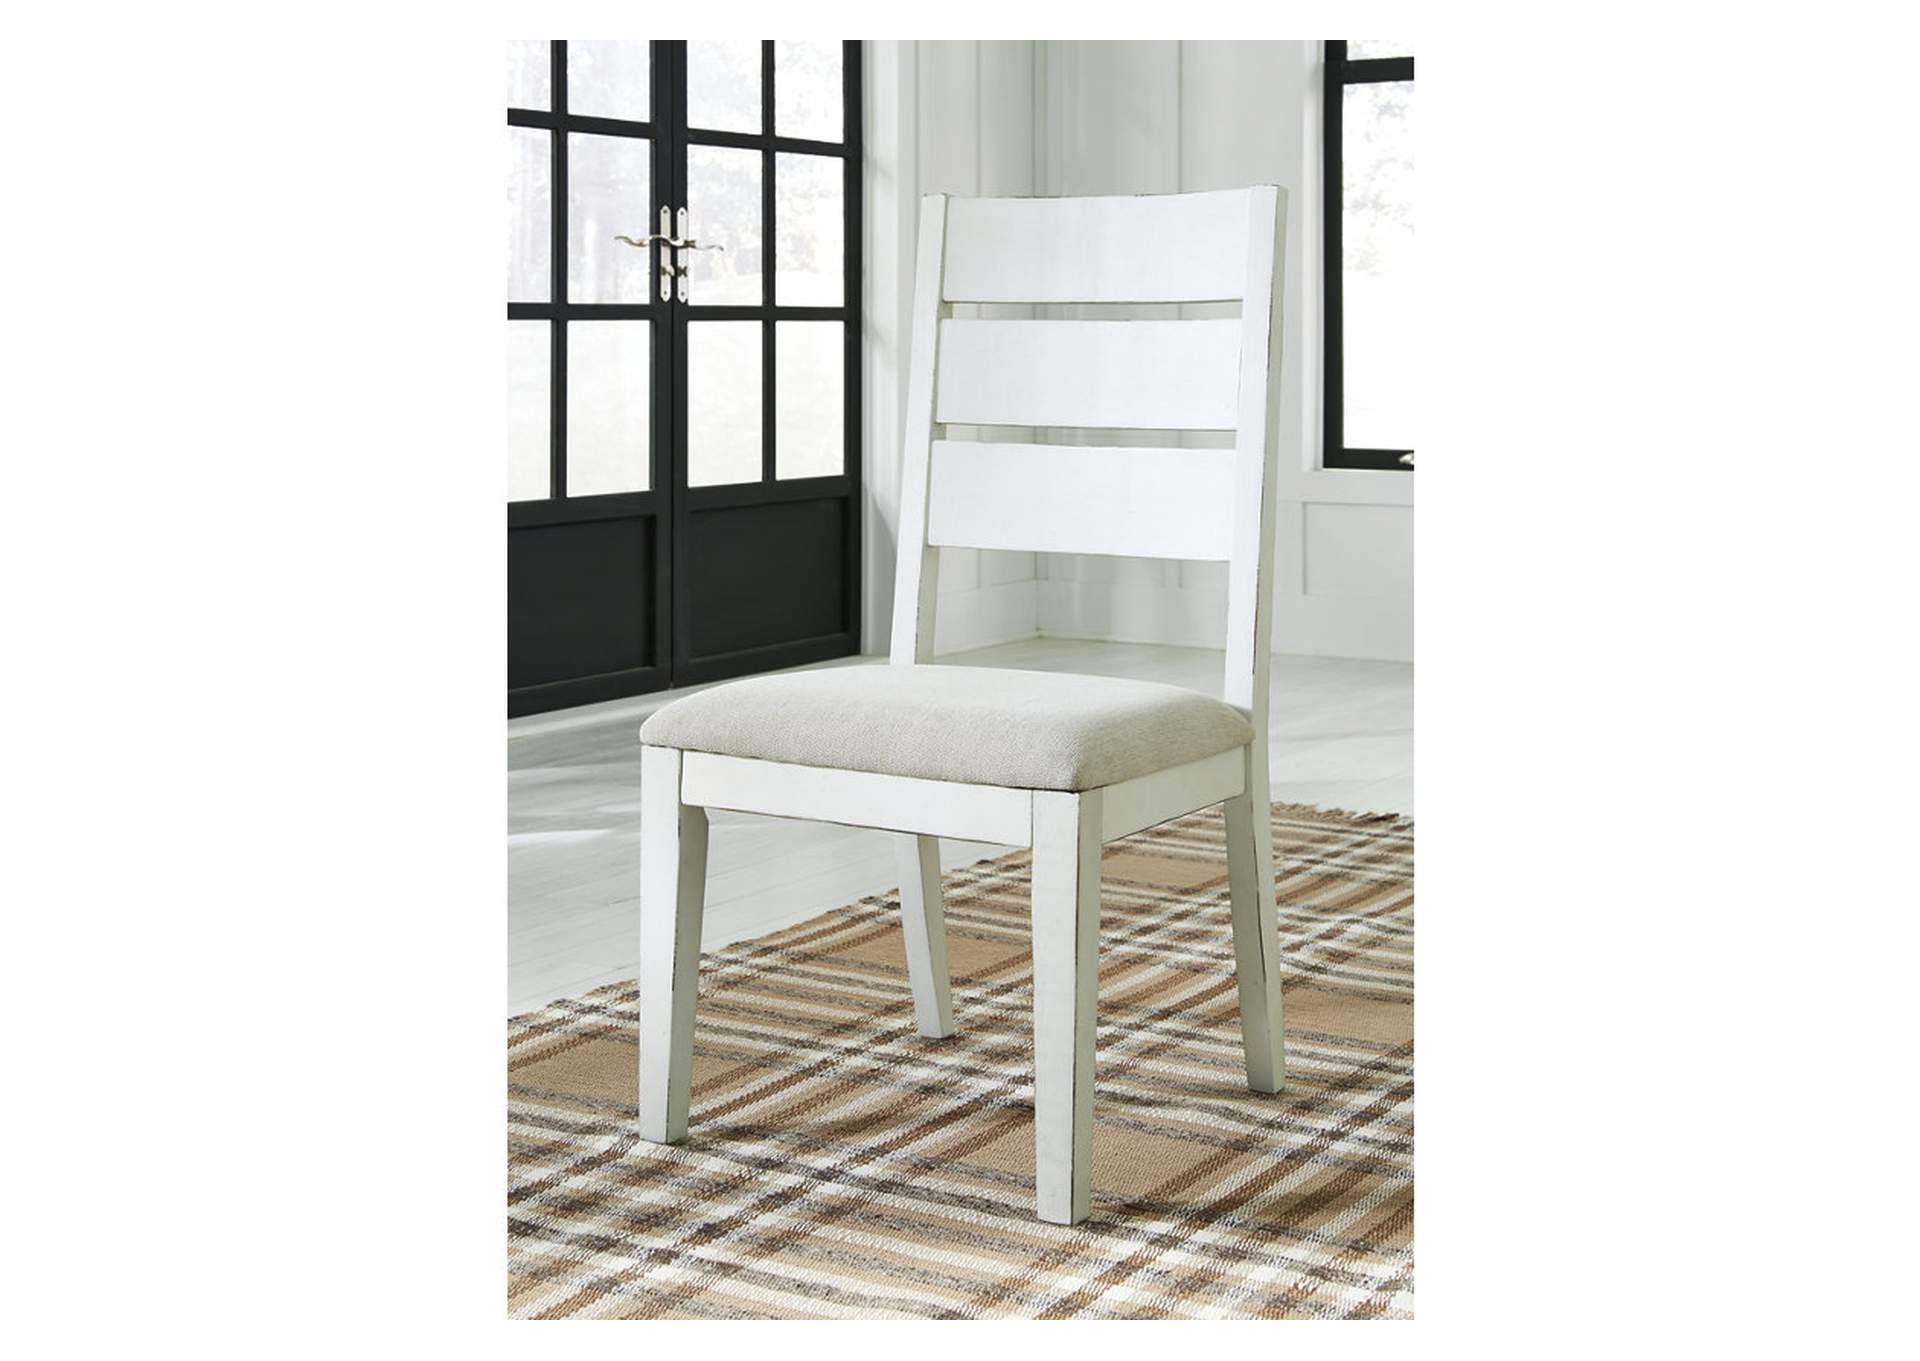 Grindleburg Dining Room Chair (Set of 2),Direct To Consumer Express